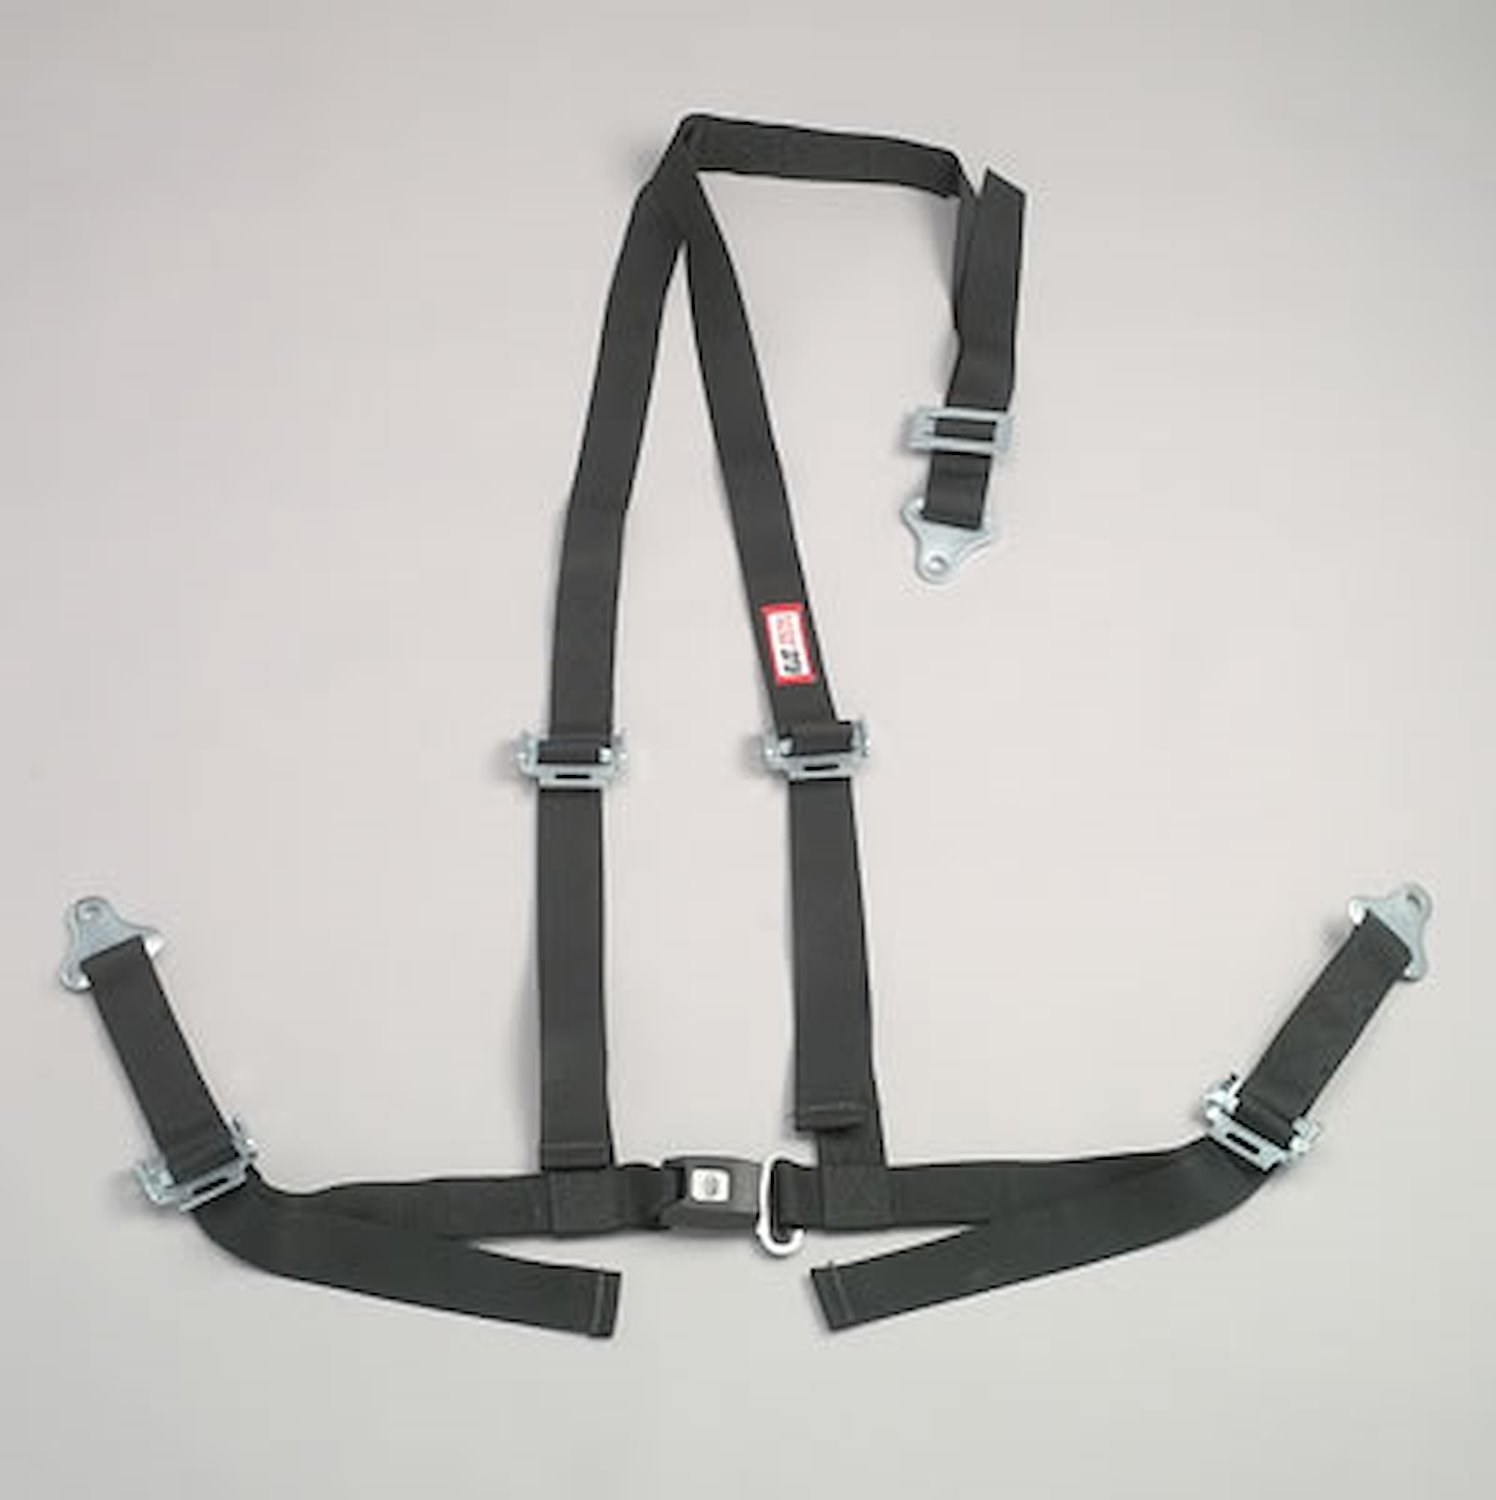 NON-SFI B&T HARNESS 2 PULL UP Lap Belt SNAP 2 S. H. Y FLOOR Mount WRAP/SNAP GRAY